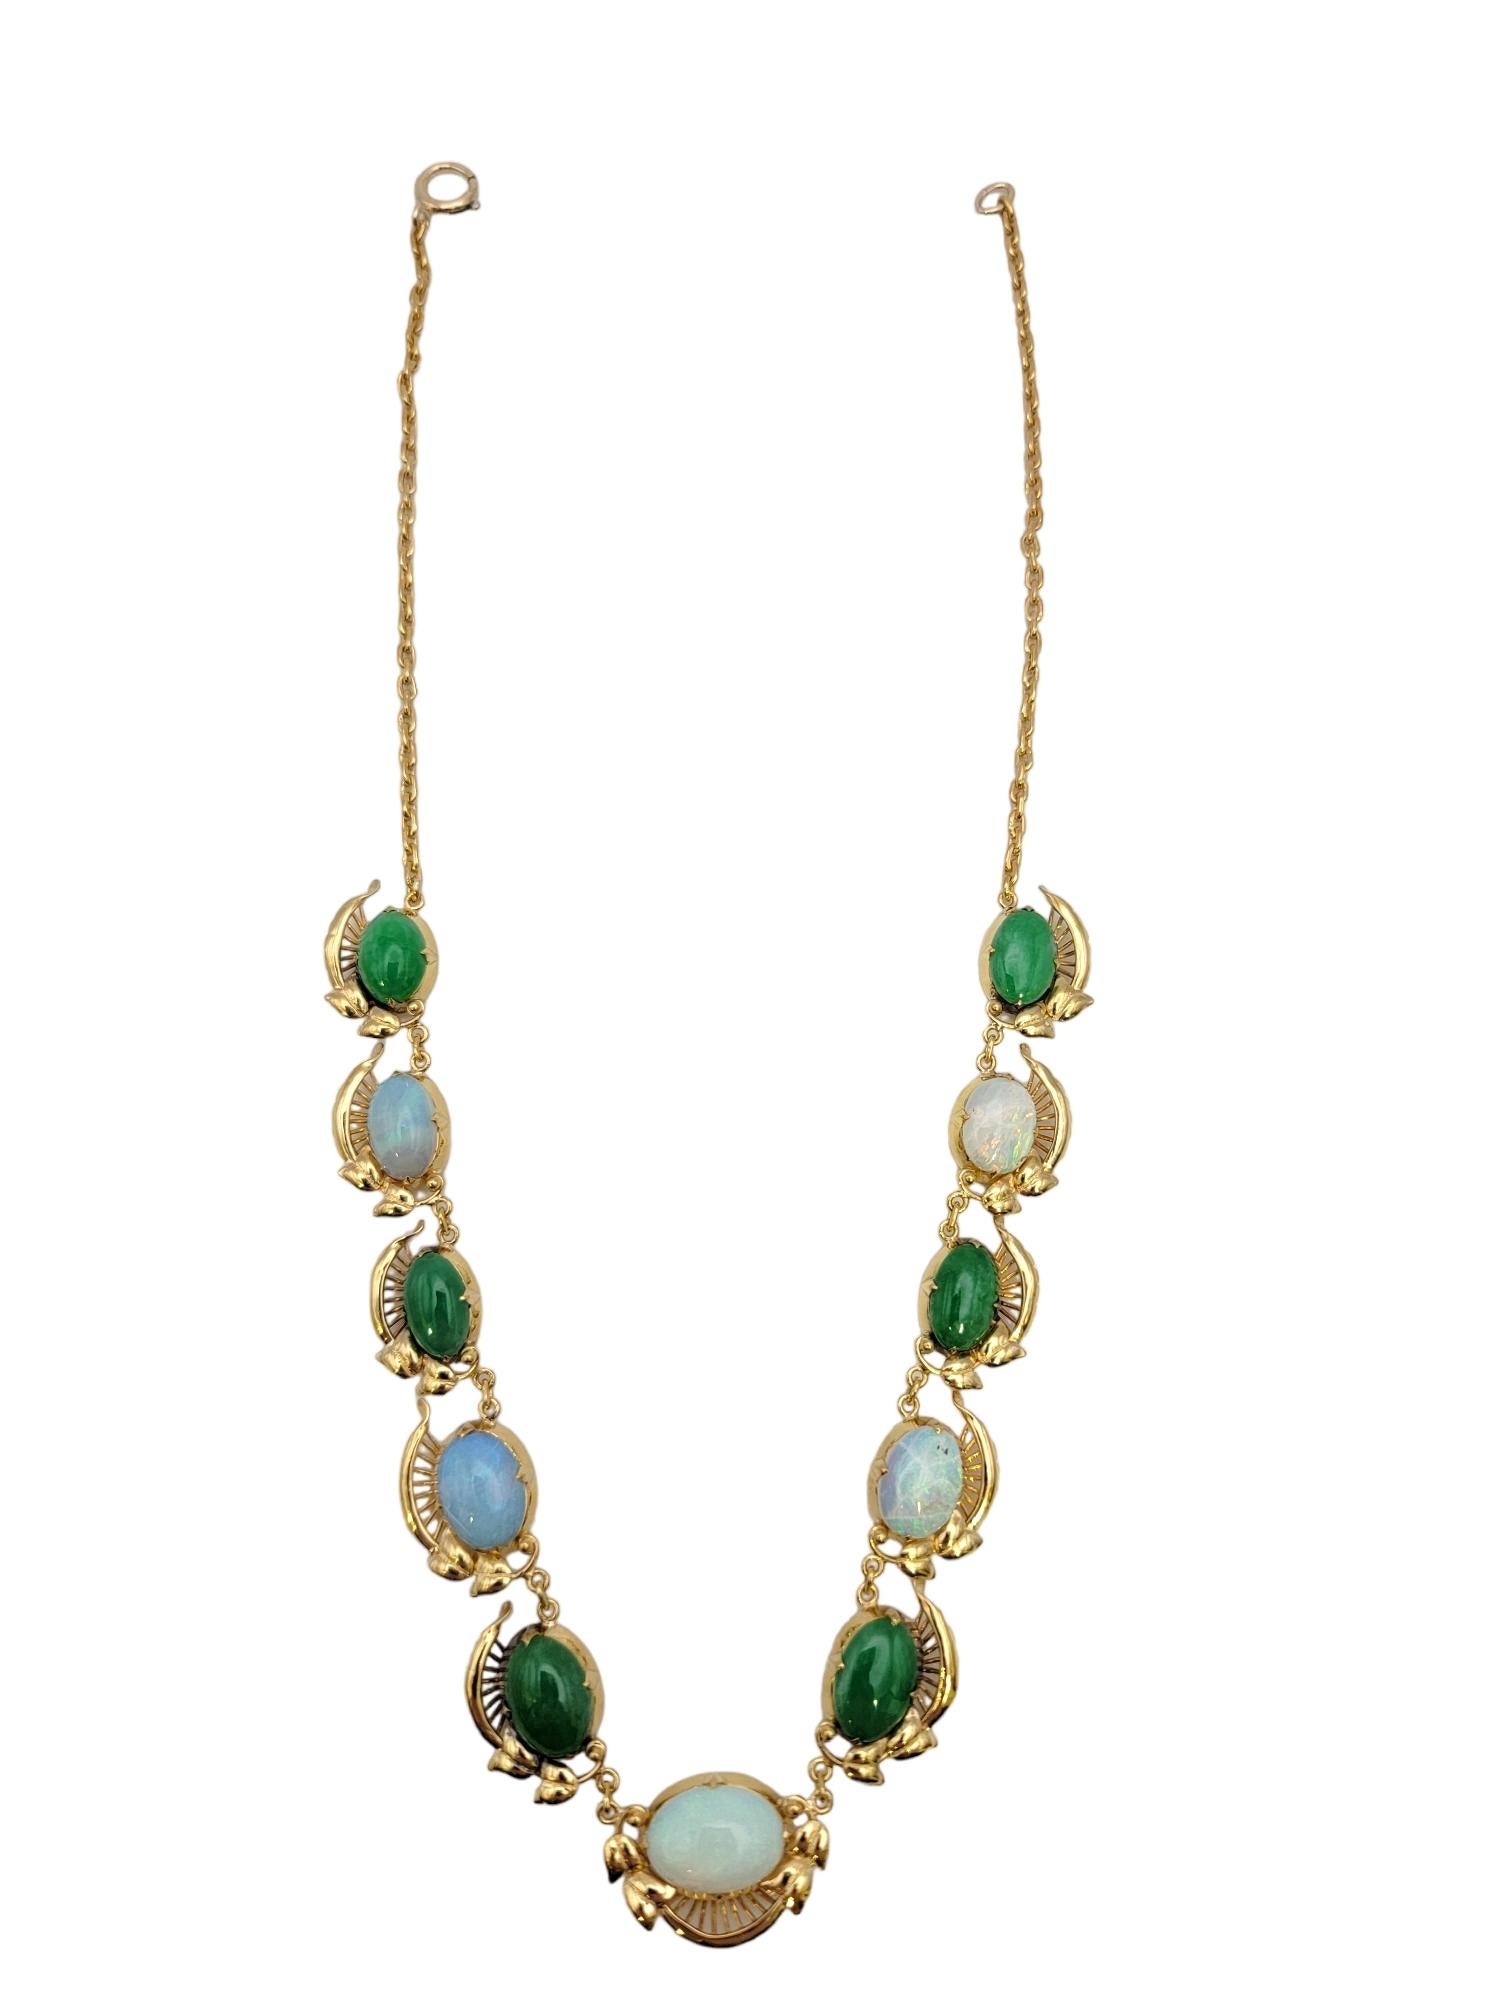 Graduated Oval Cabochon Jade and Opal Choker Necklace in Polished Yellow Gold For Sale 2